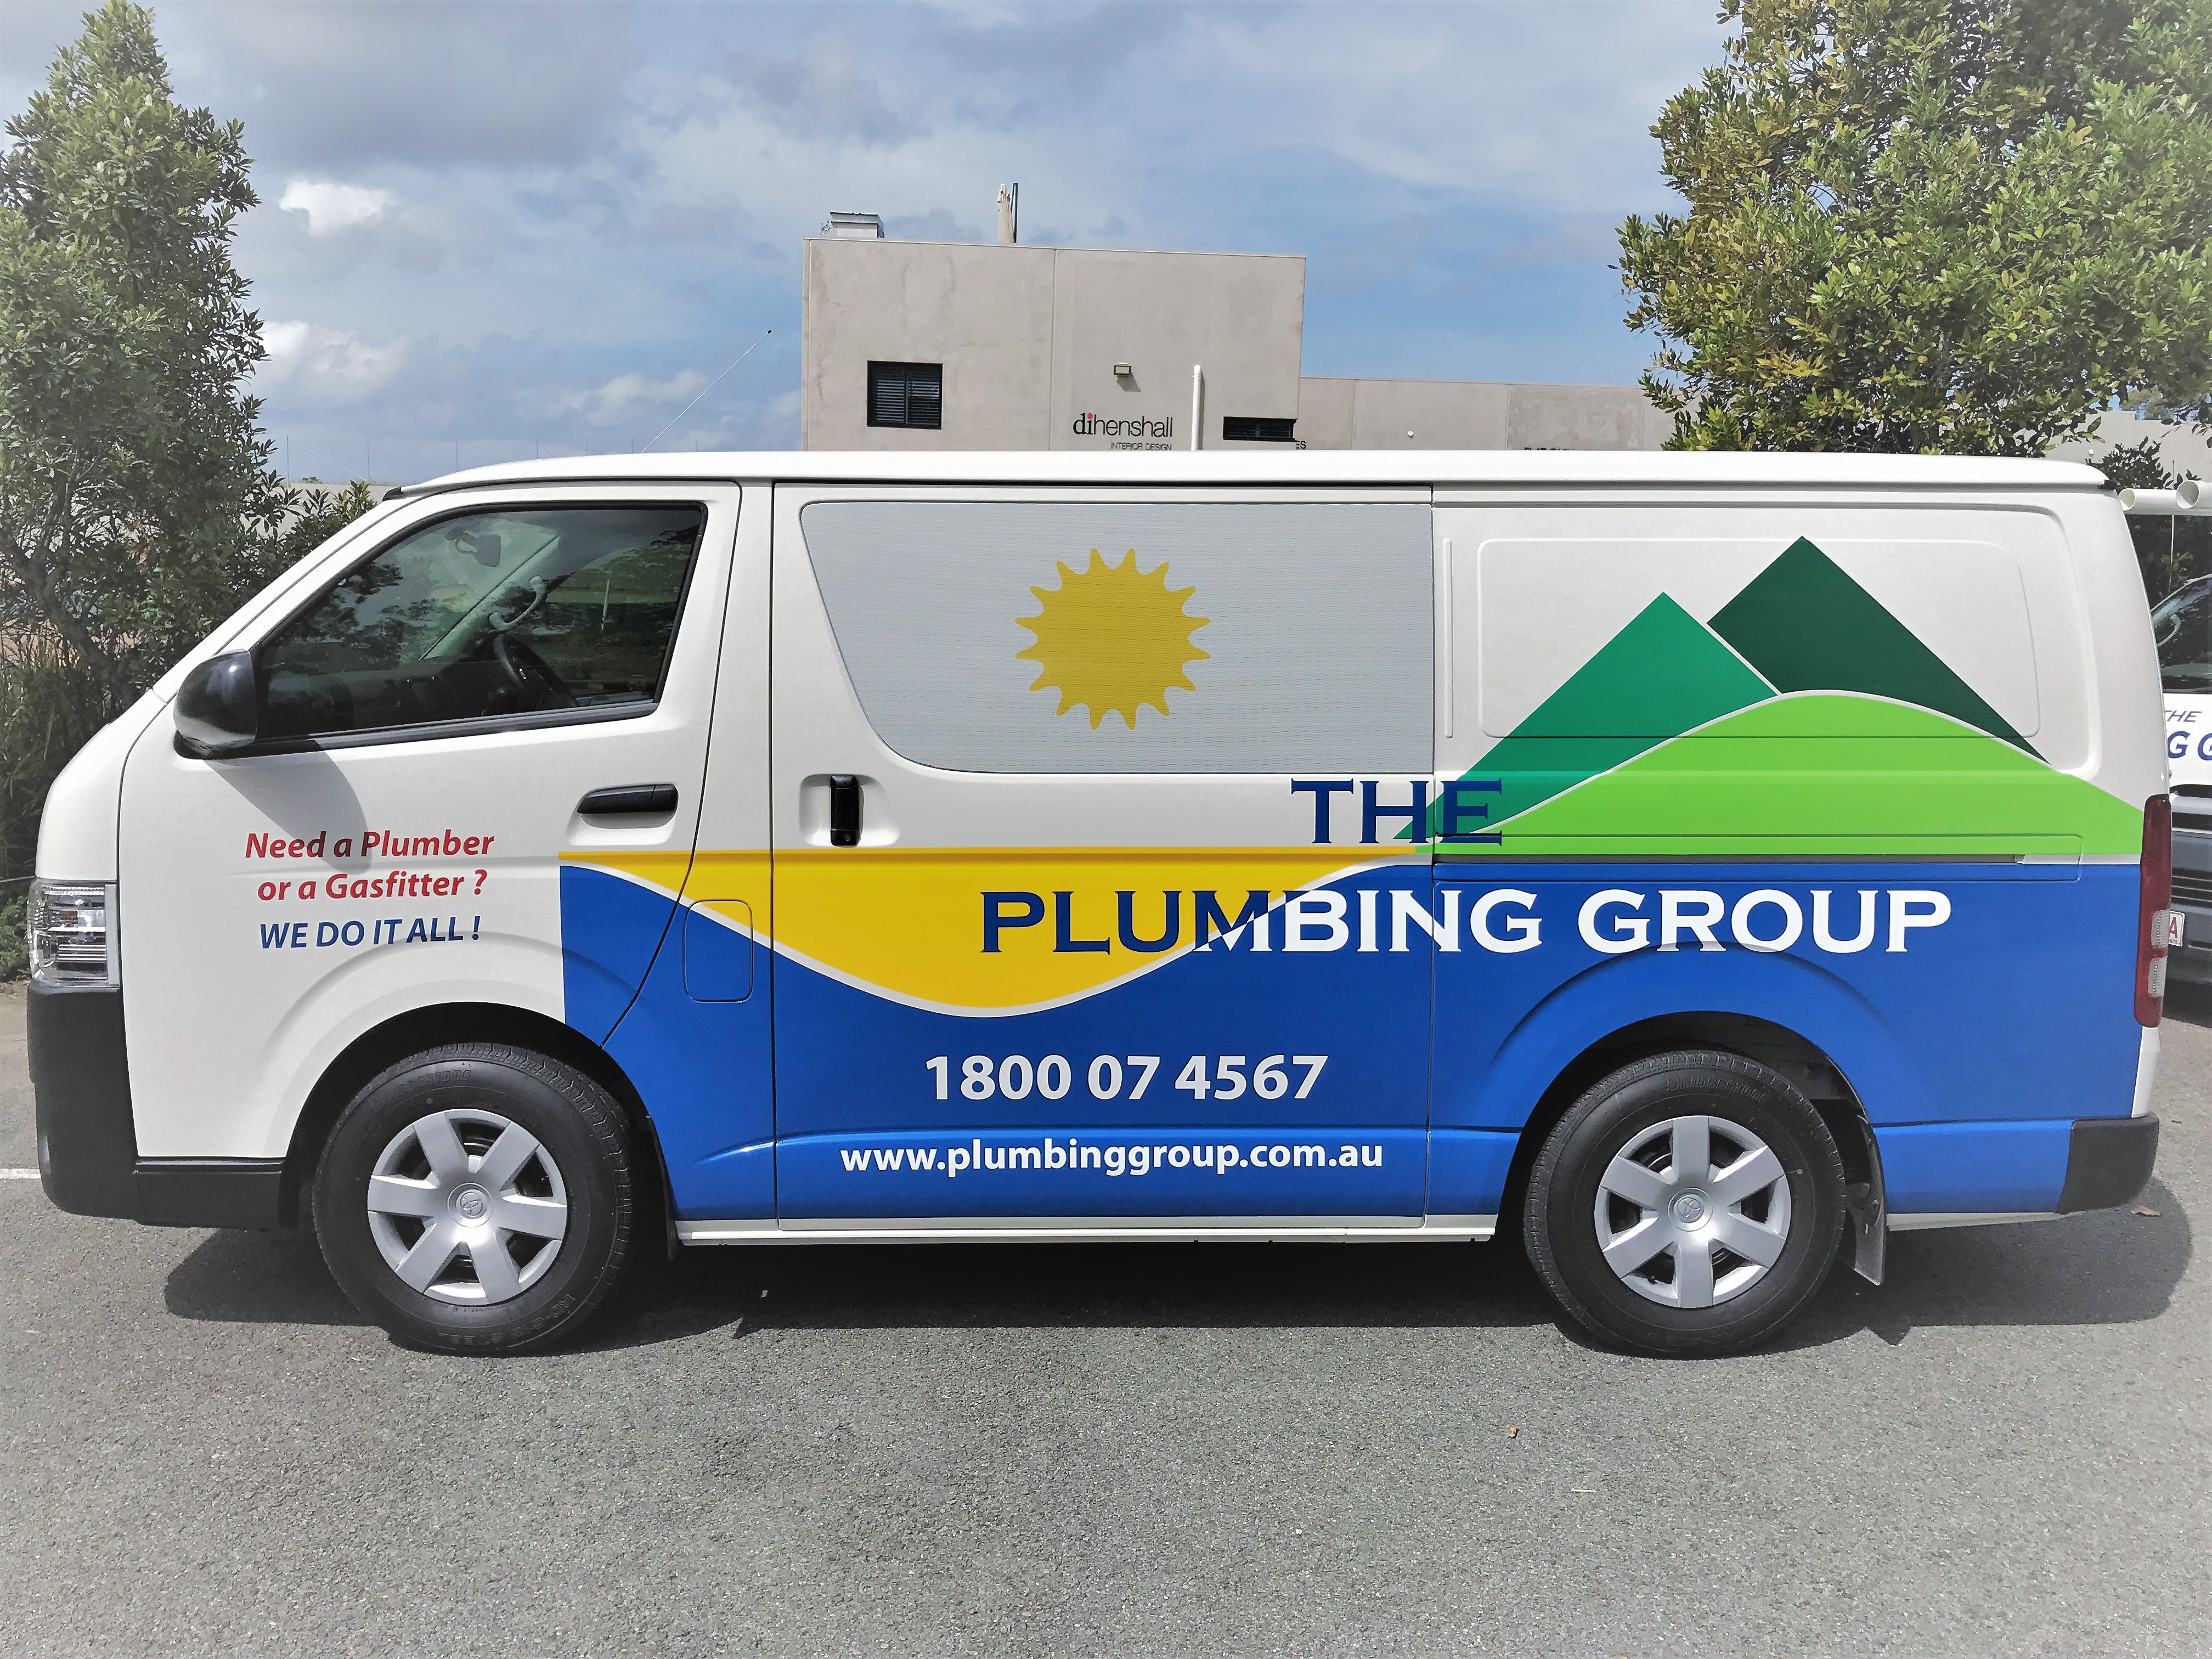 Images The Plumbing Group